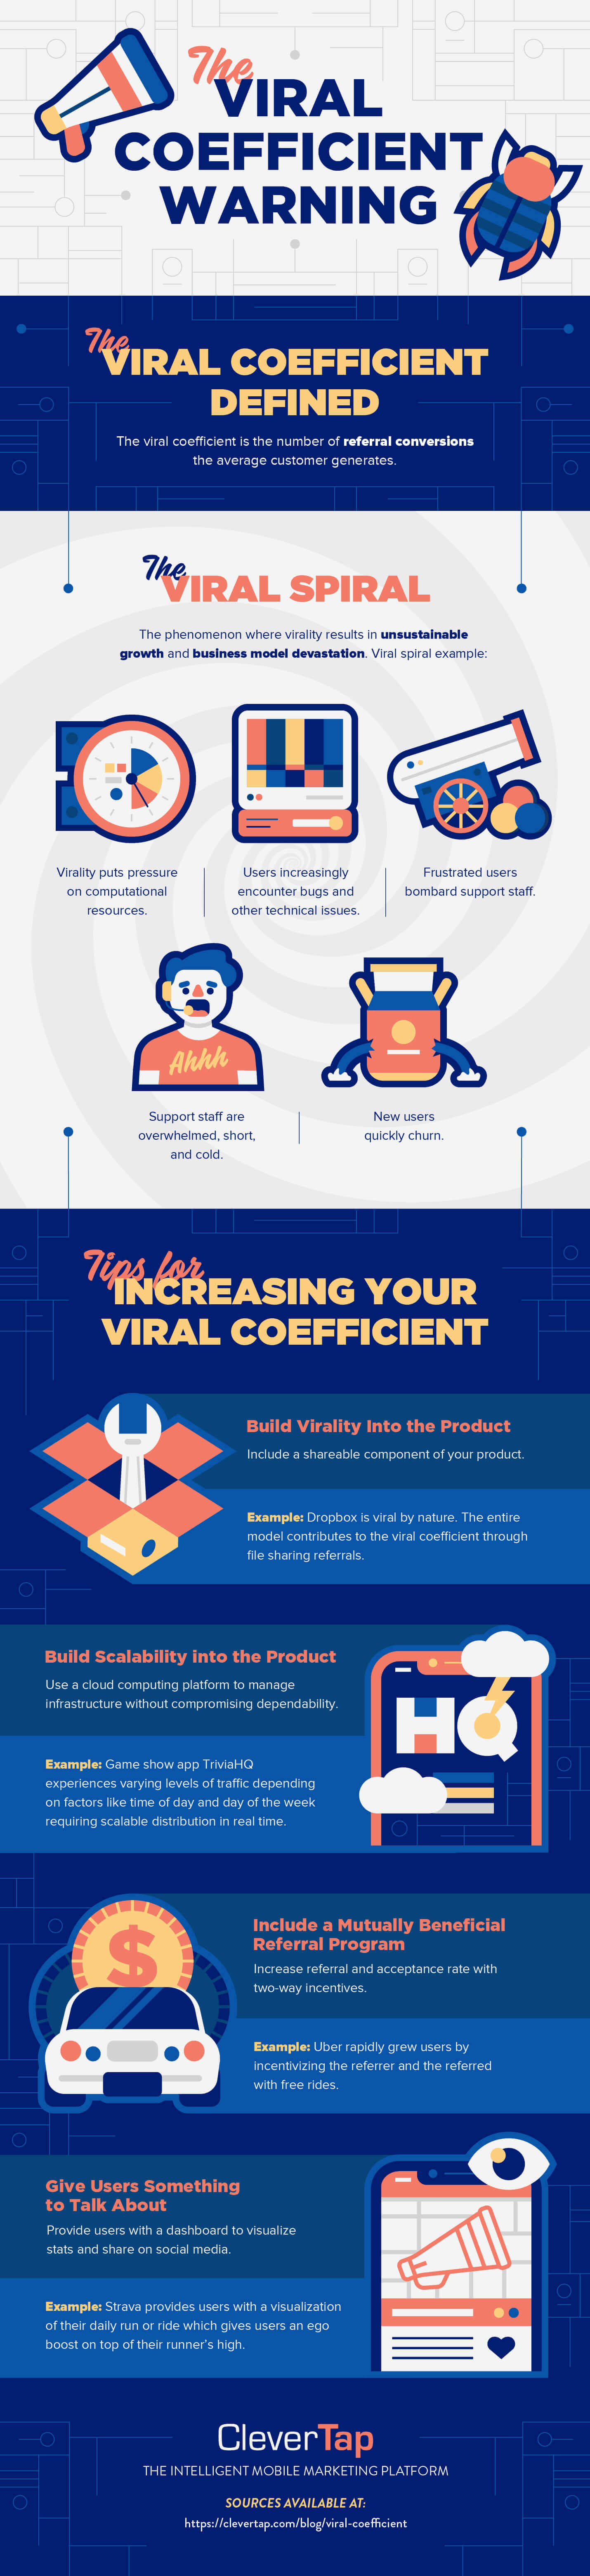 Viral coefficient tips infographic